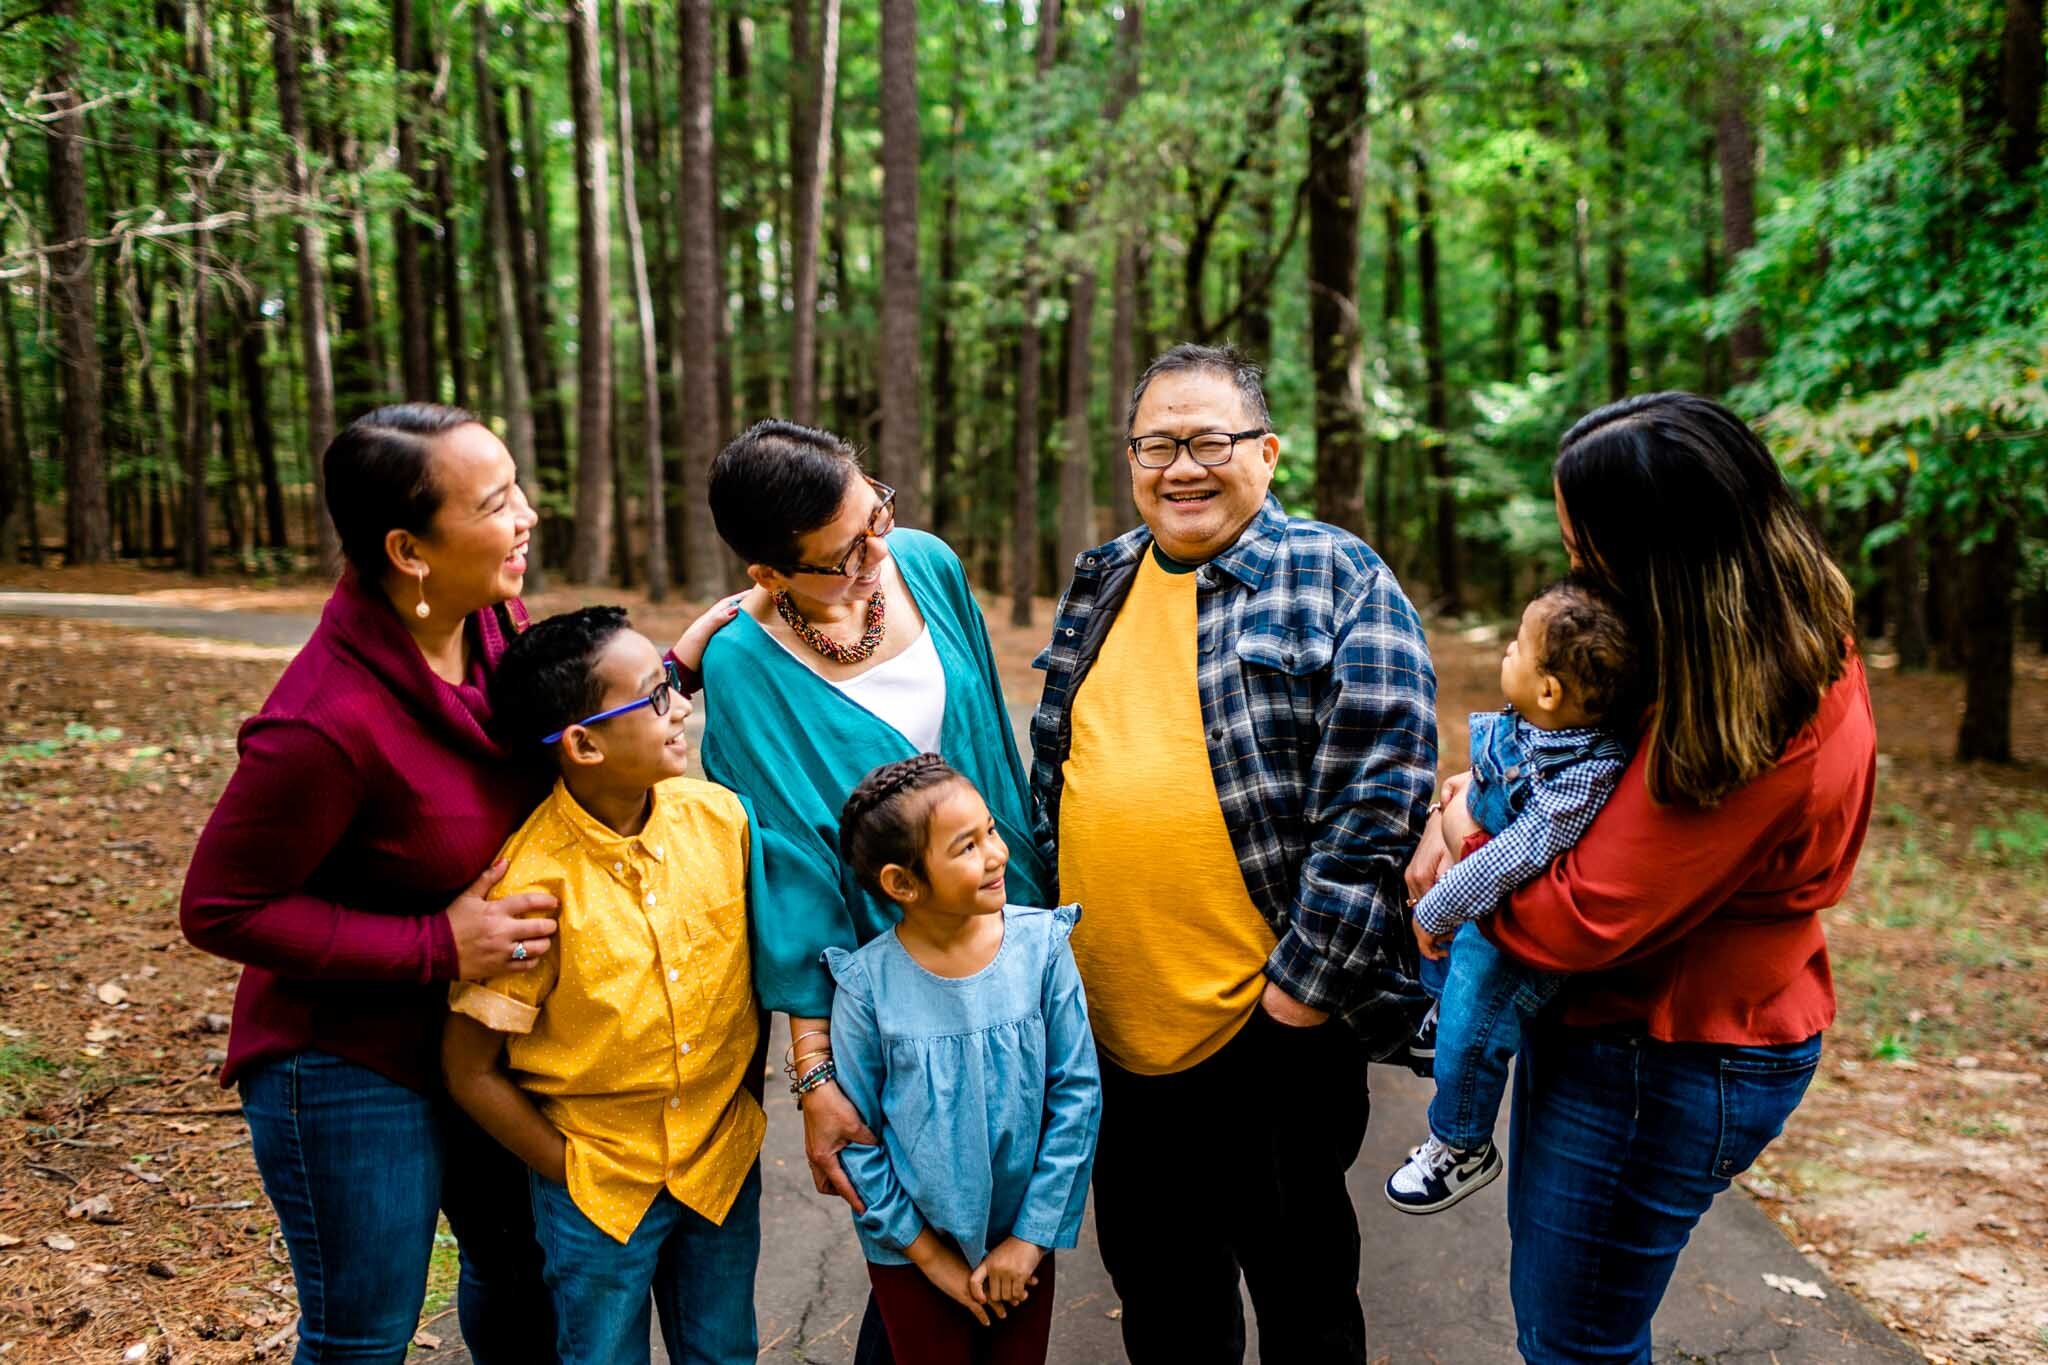 Raleigh Family Photographer | By G. Lin Photography | Umstead Park | Large group fall family photo outdoors